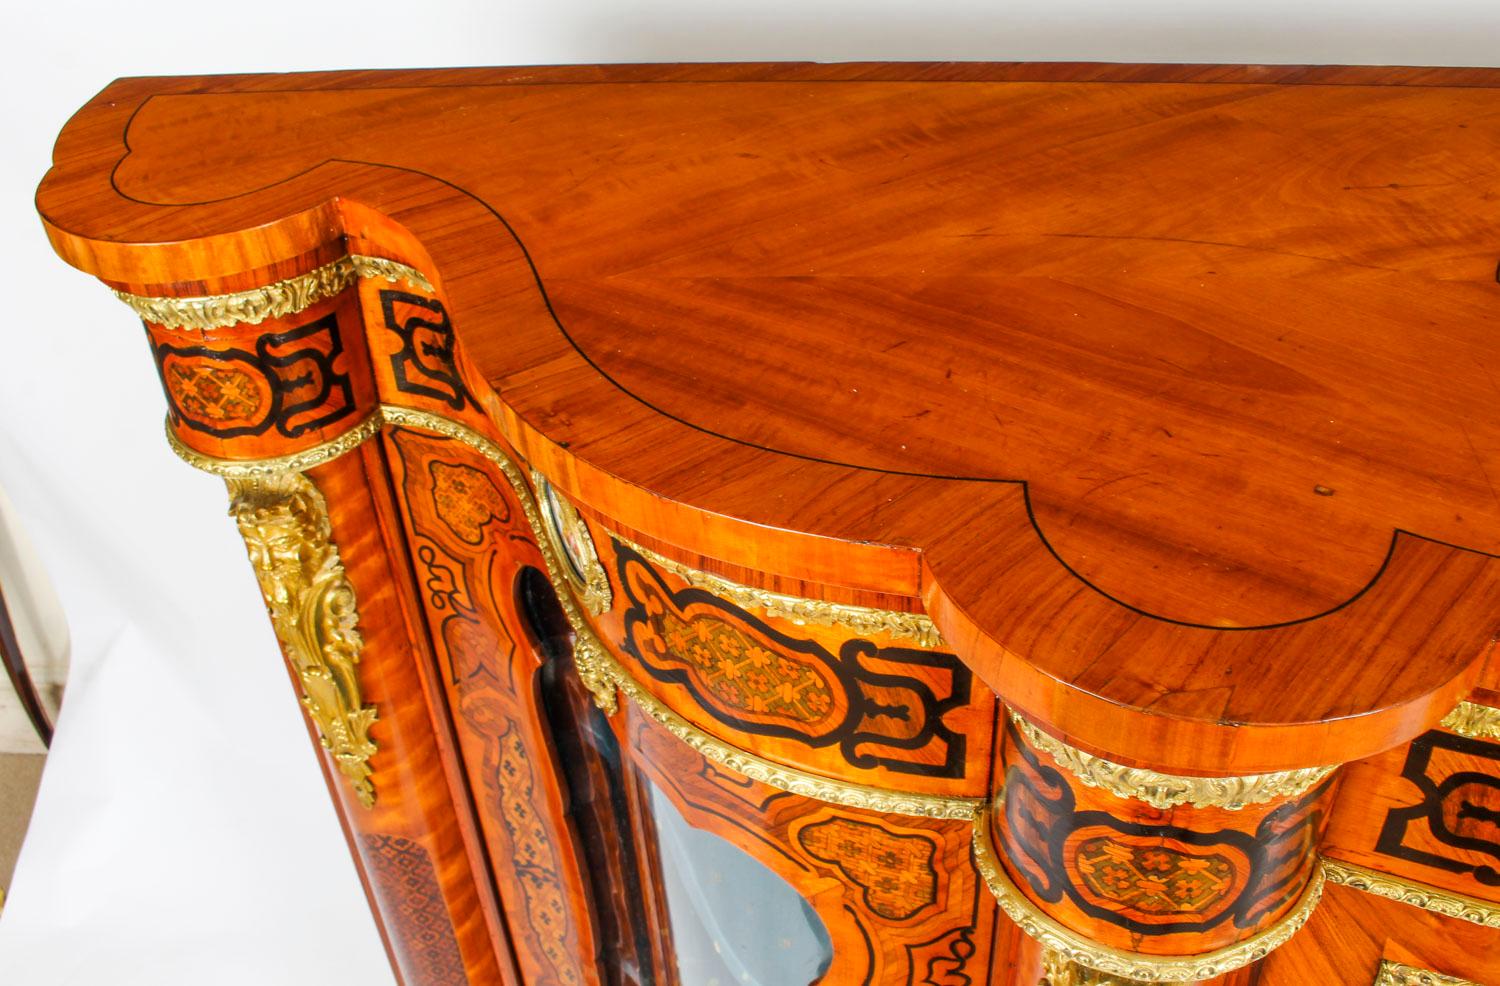 This is a superb antique French kingwood and marquetry inlaid serpentine credenza, circa 1870 in date.

Oozing sophistication and charm, this credenza is the absolute epitome of French High Society.

The entire piece highlights the unique and truly